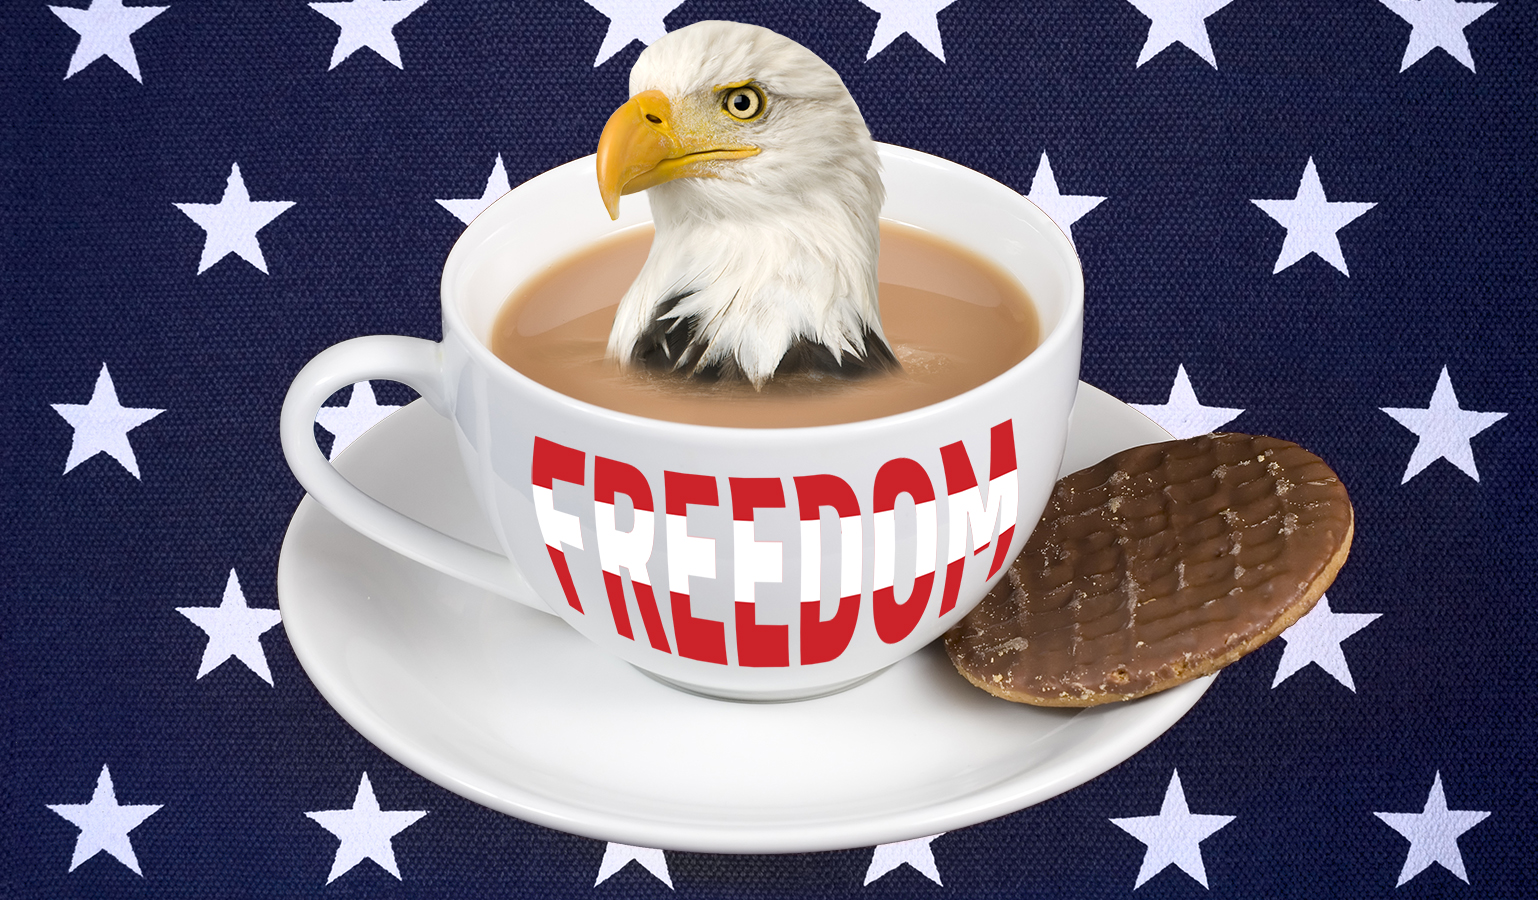 An America Eagle sitting in a cup of tea, with a chocolate biscuit on the saucer